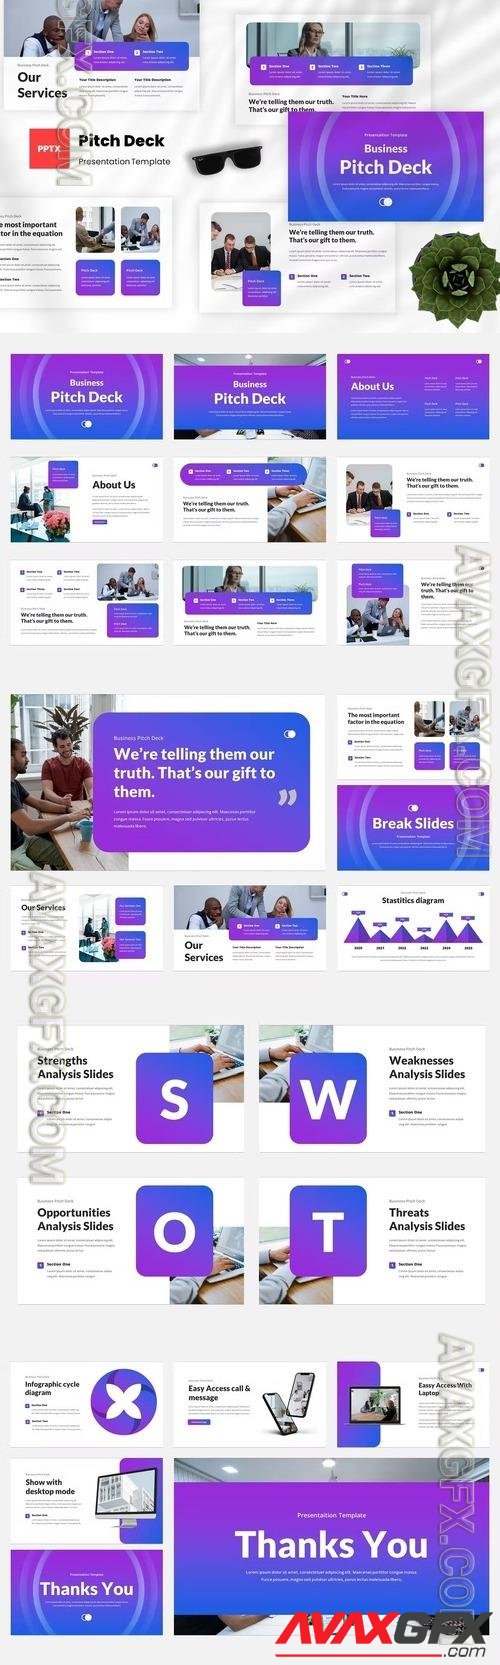 Business Pitch Deck Powerpoint Template [PPTX]